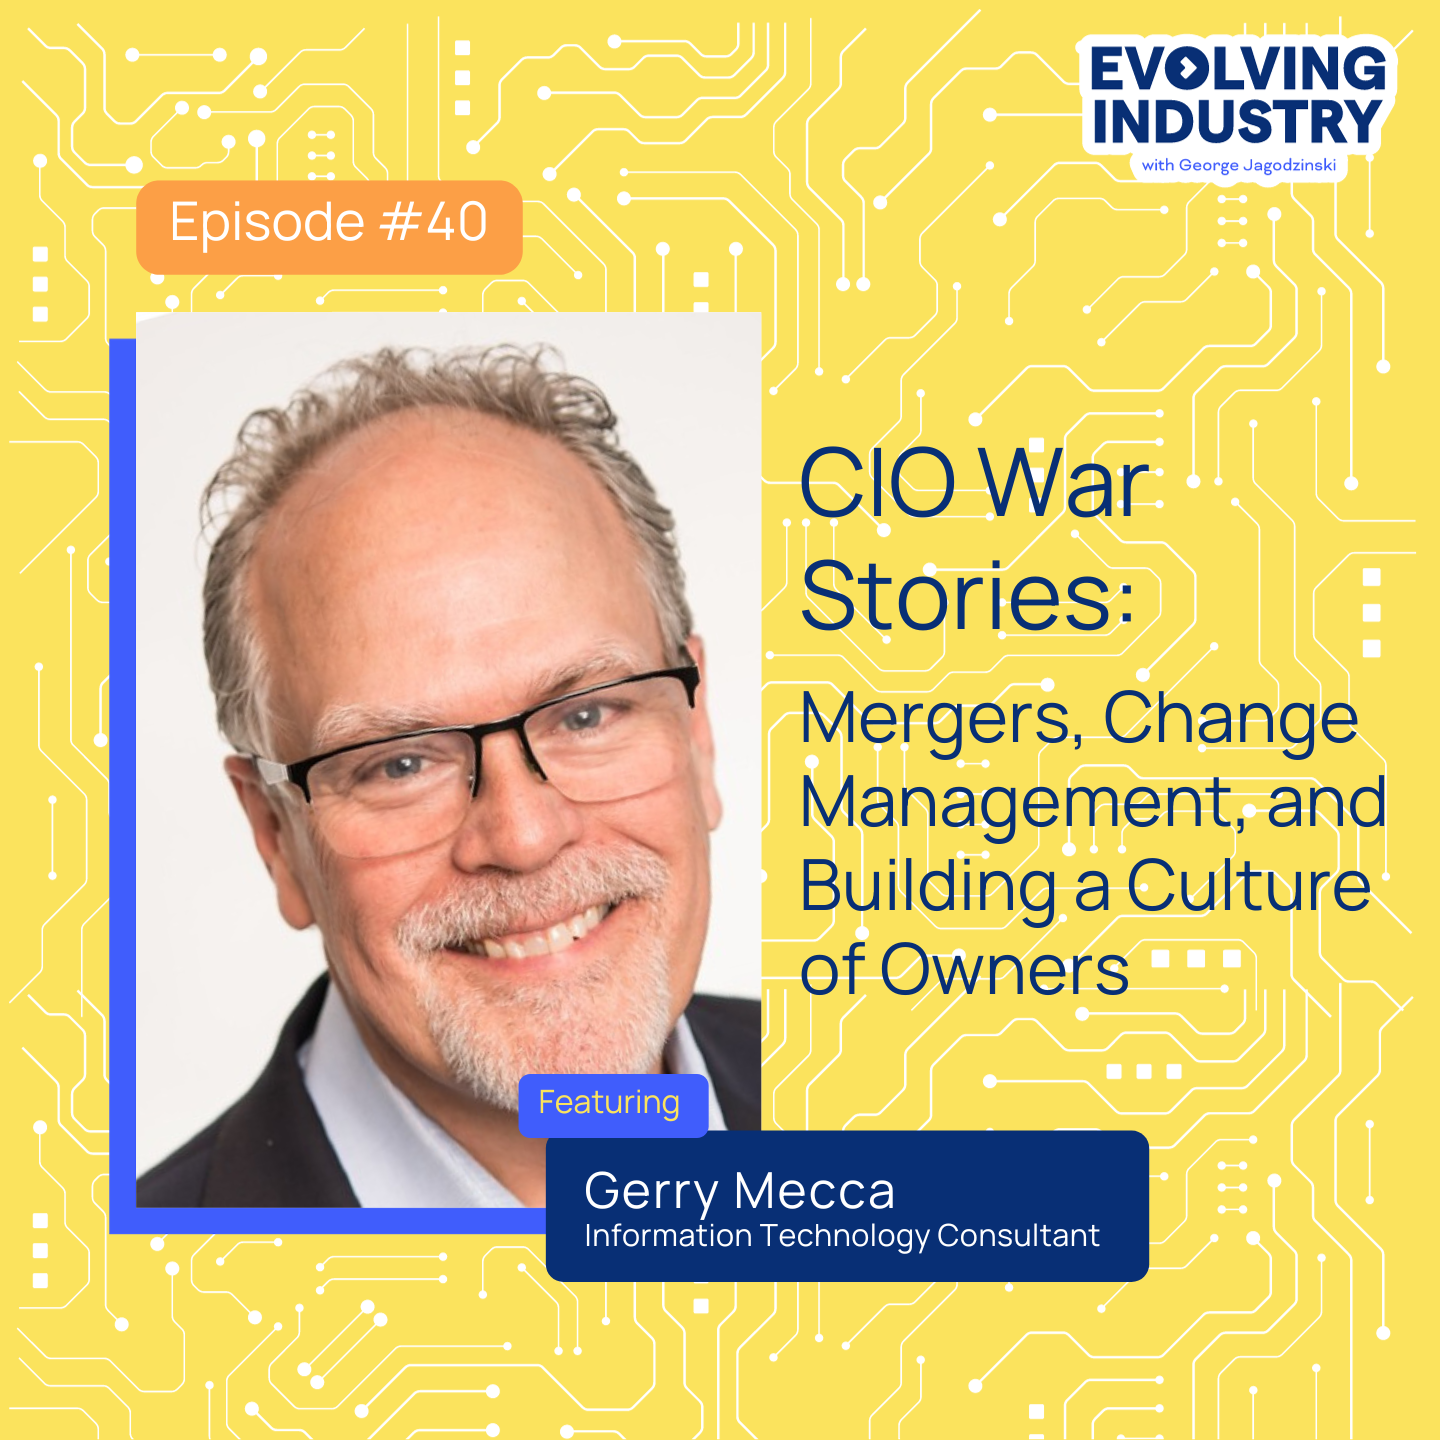 CIO War Stories: Mergers, Change Management, and Building a Culture of Owners